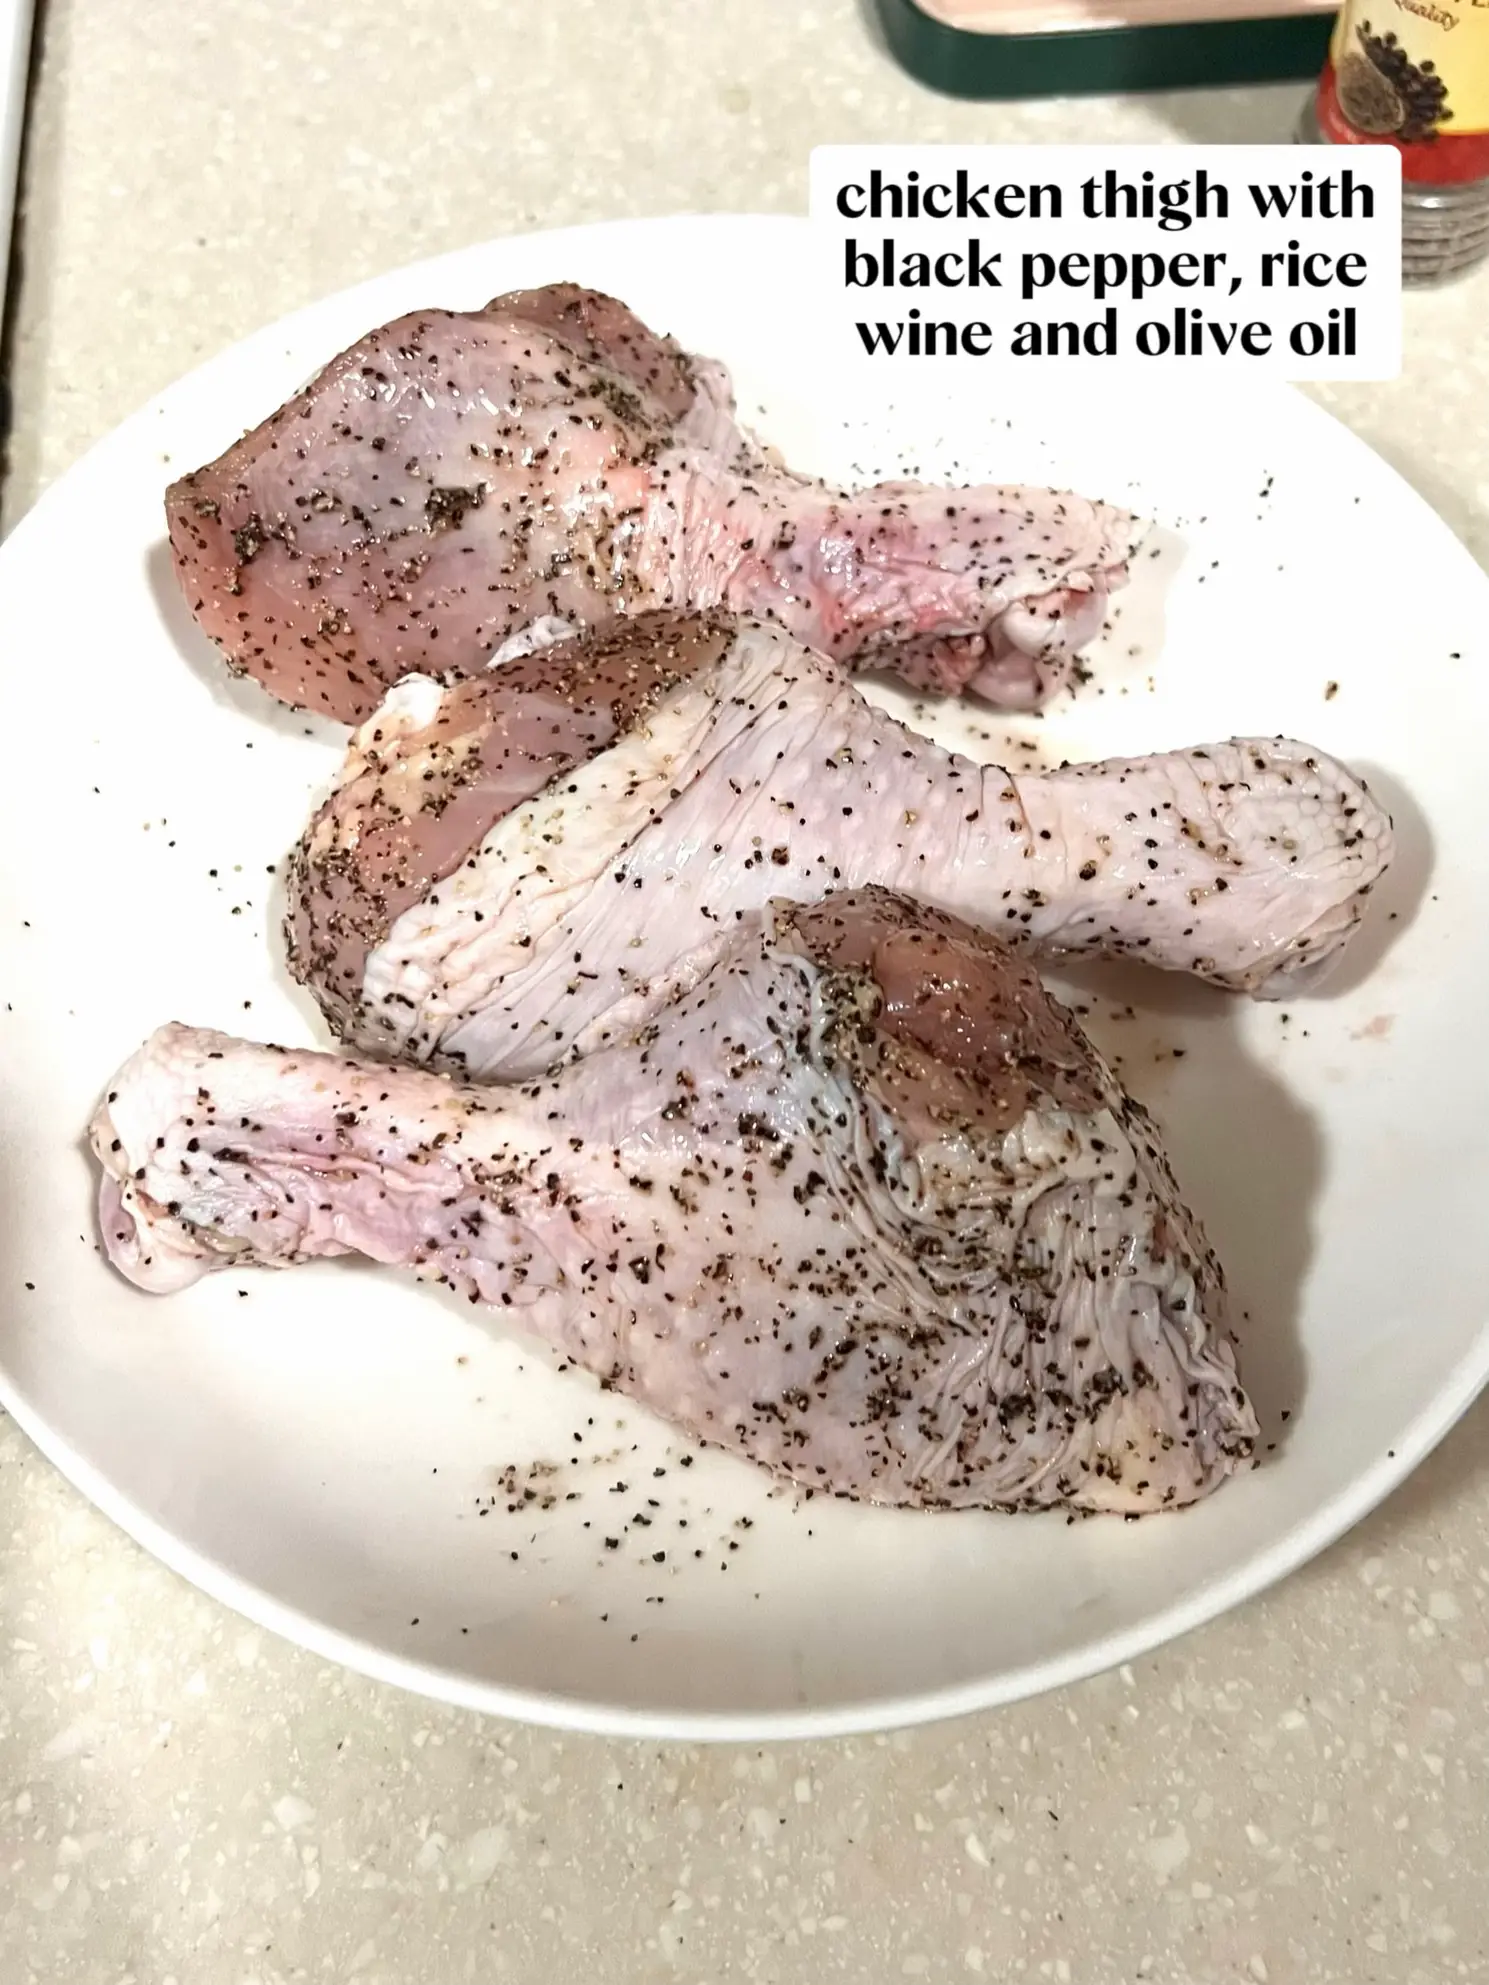 Lemon Thyme Chicken Recipe 😍 Super Simple and Easy's images(1)